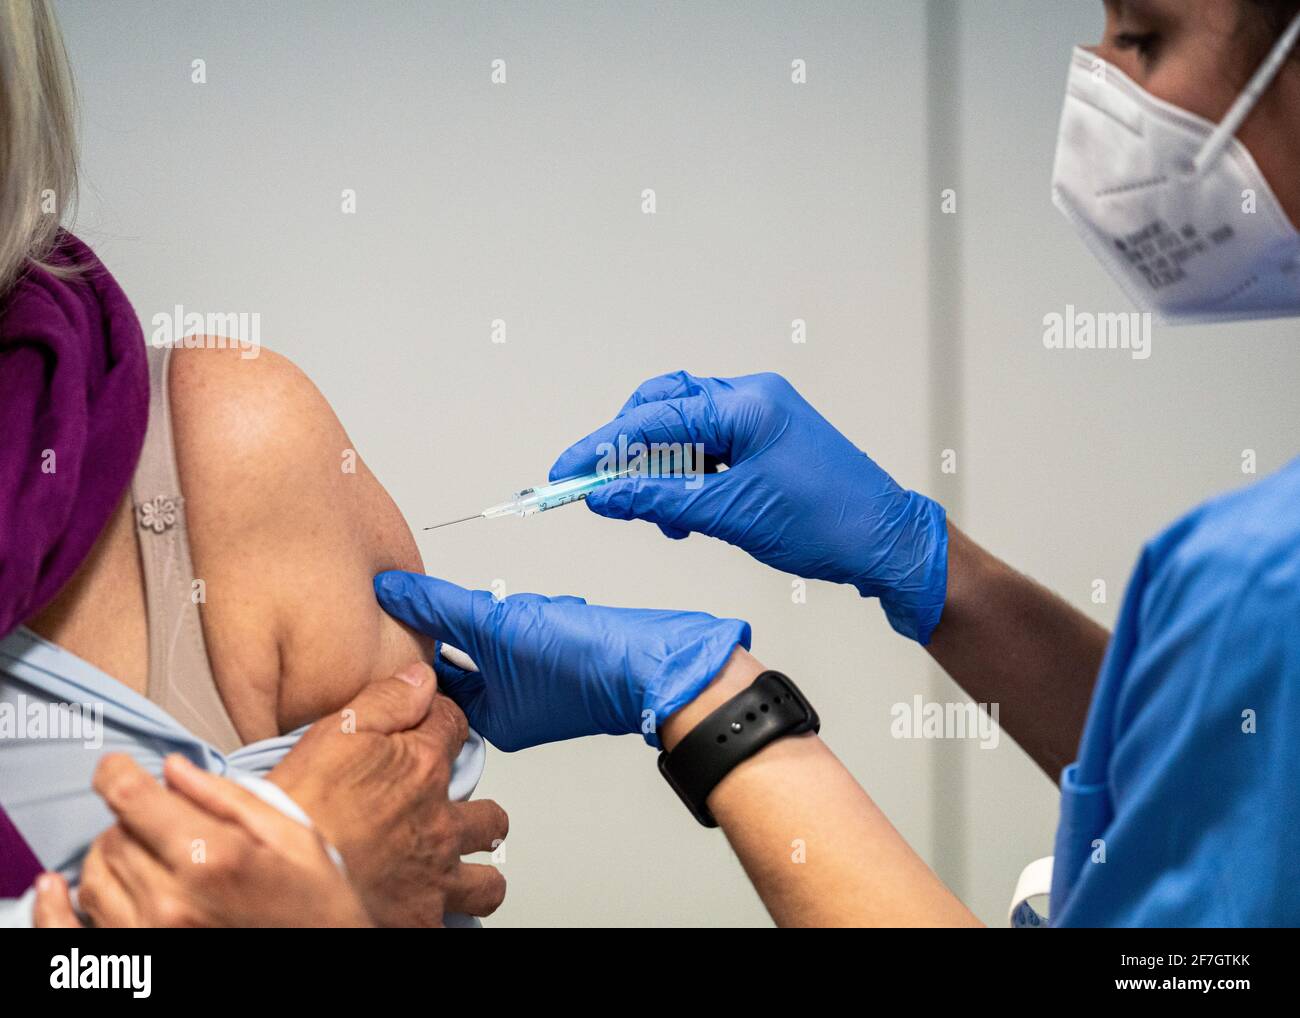 Cornella, Spain. 7th Apr, 2021. A resident receives a dose of AstraZeneca COVID-19 vaccine at a vaccination site in Cornella, Spain, April 7, 2021. The European Medicines Agency (EMA) confirmed on Wednesday that the occurrence of blood clots with low blood platelets are strongly associated with the administration of AstraZeneca COVID-19 vaccine, but should be still listed as very rare side effects. Credit: Joan Gosa/Xinhua/Alamy Live News Stock Photo